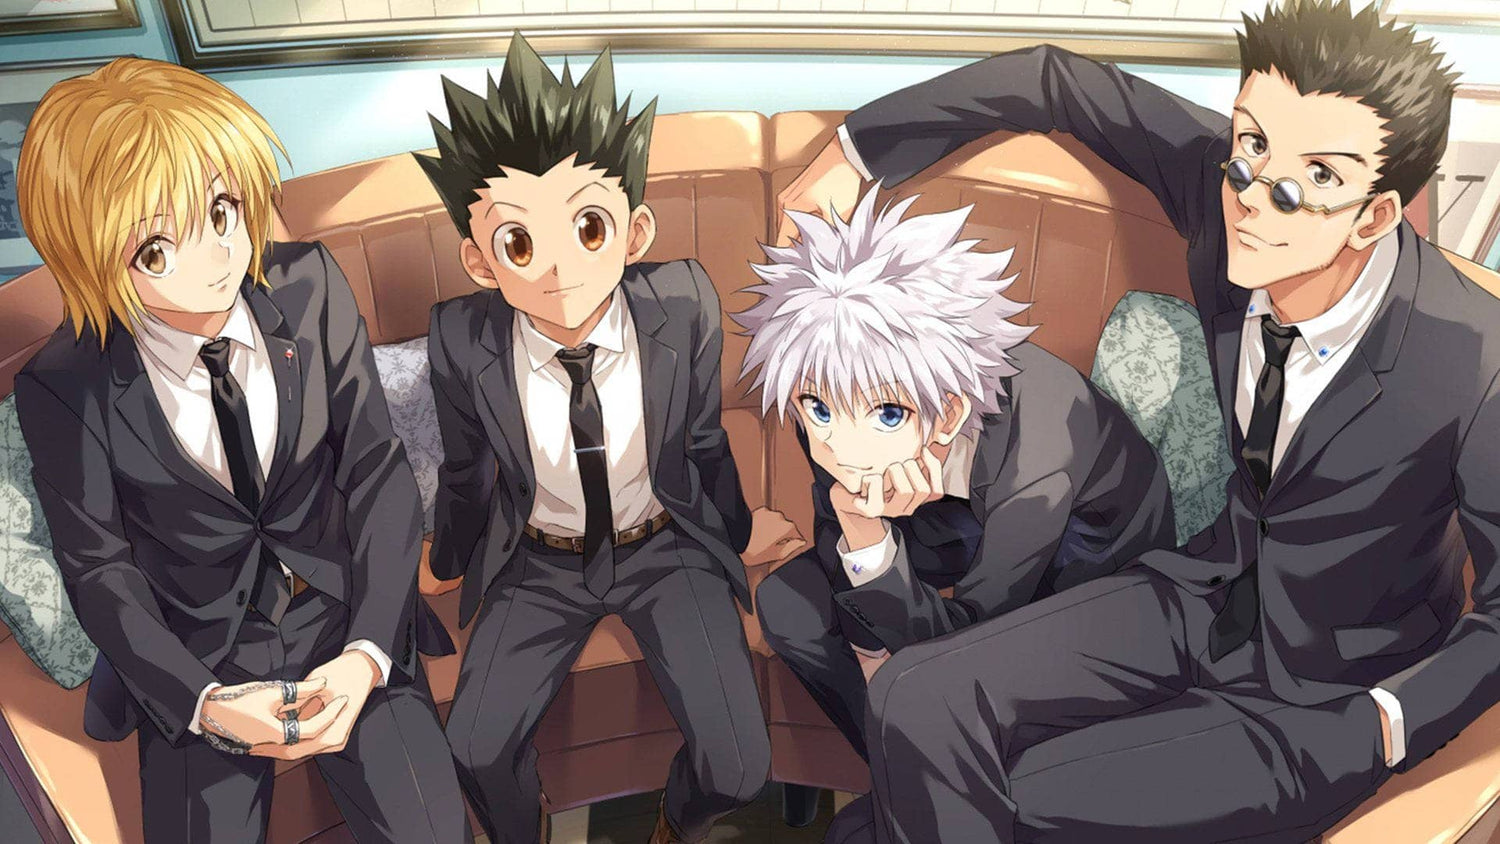 TKYSPORT 'contact us' banner showing the hunter x hunter crew sat on a couch wearing formal suits